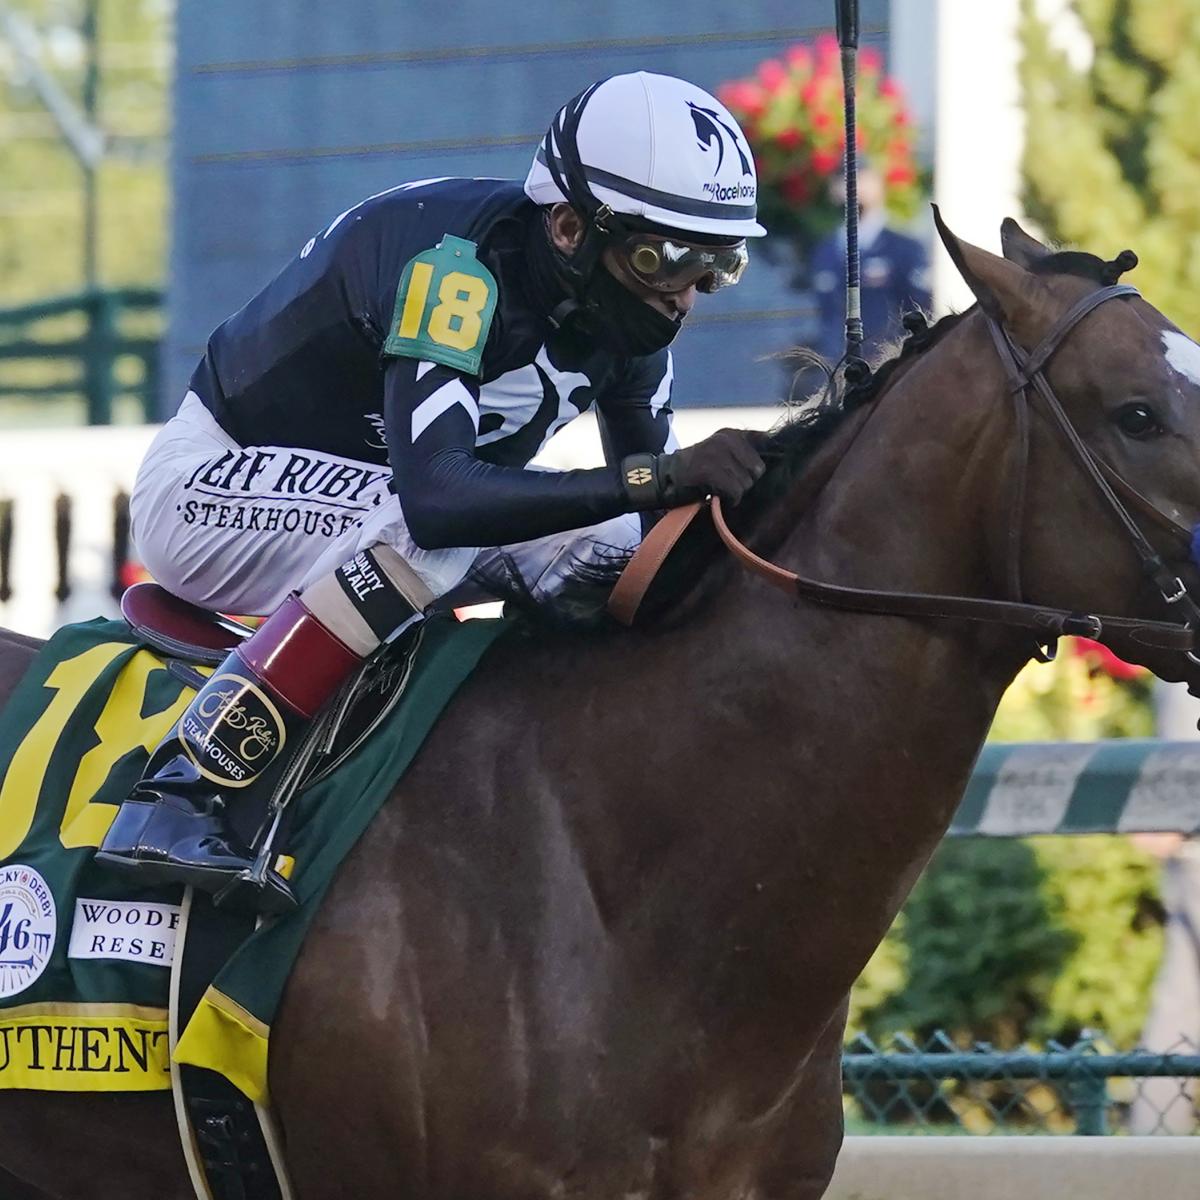 Preakness Picks 2020: Predictions and Odds for All Horses within the Lineup